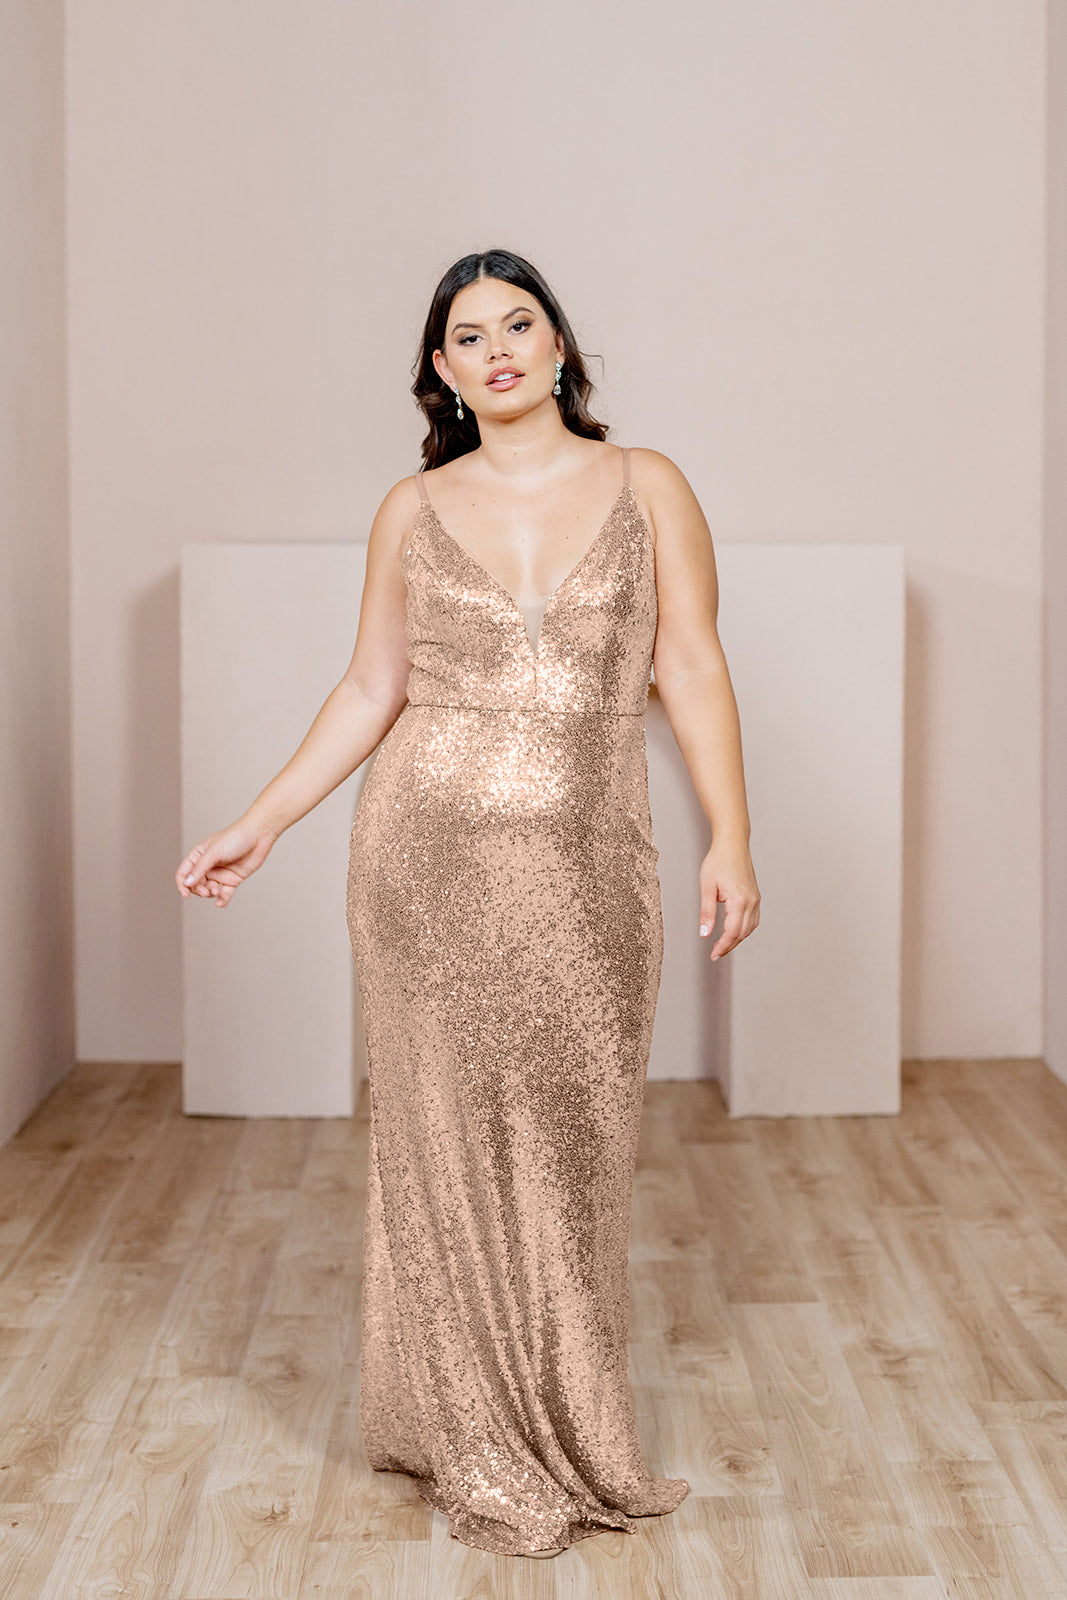 Gold Long Strapless Stretch Satin Dress With Sweetheart Neck | Faviana